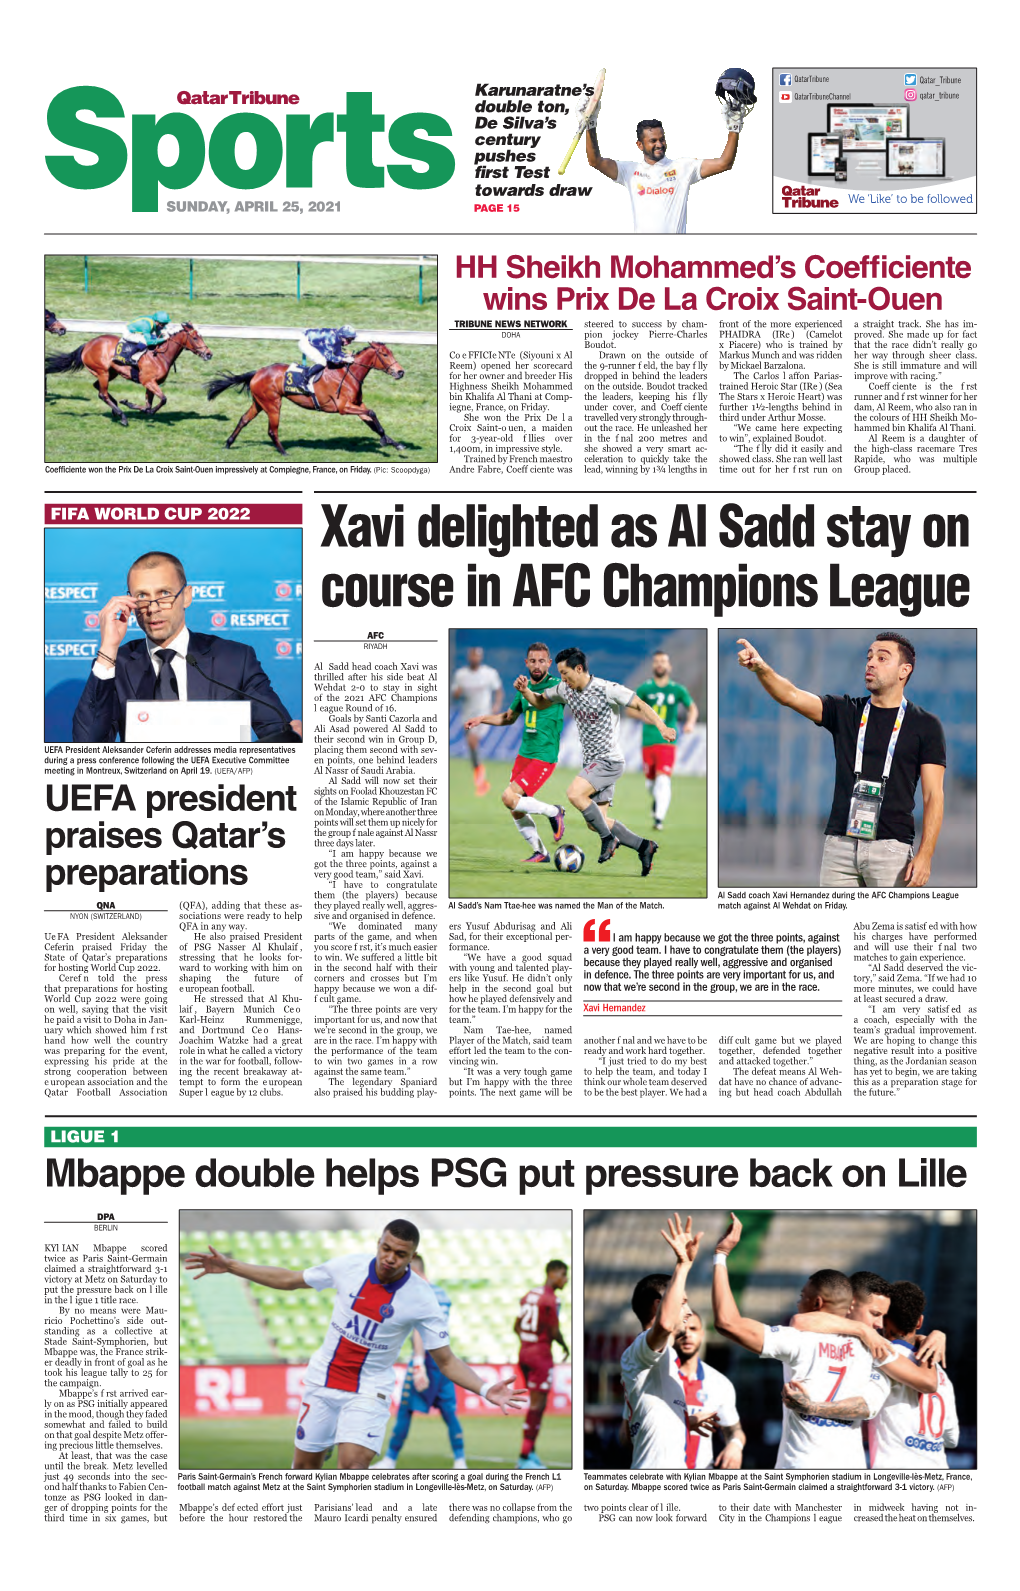 Xavi Delighted As Al Sadd Stay on Course in AFC Champions League